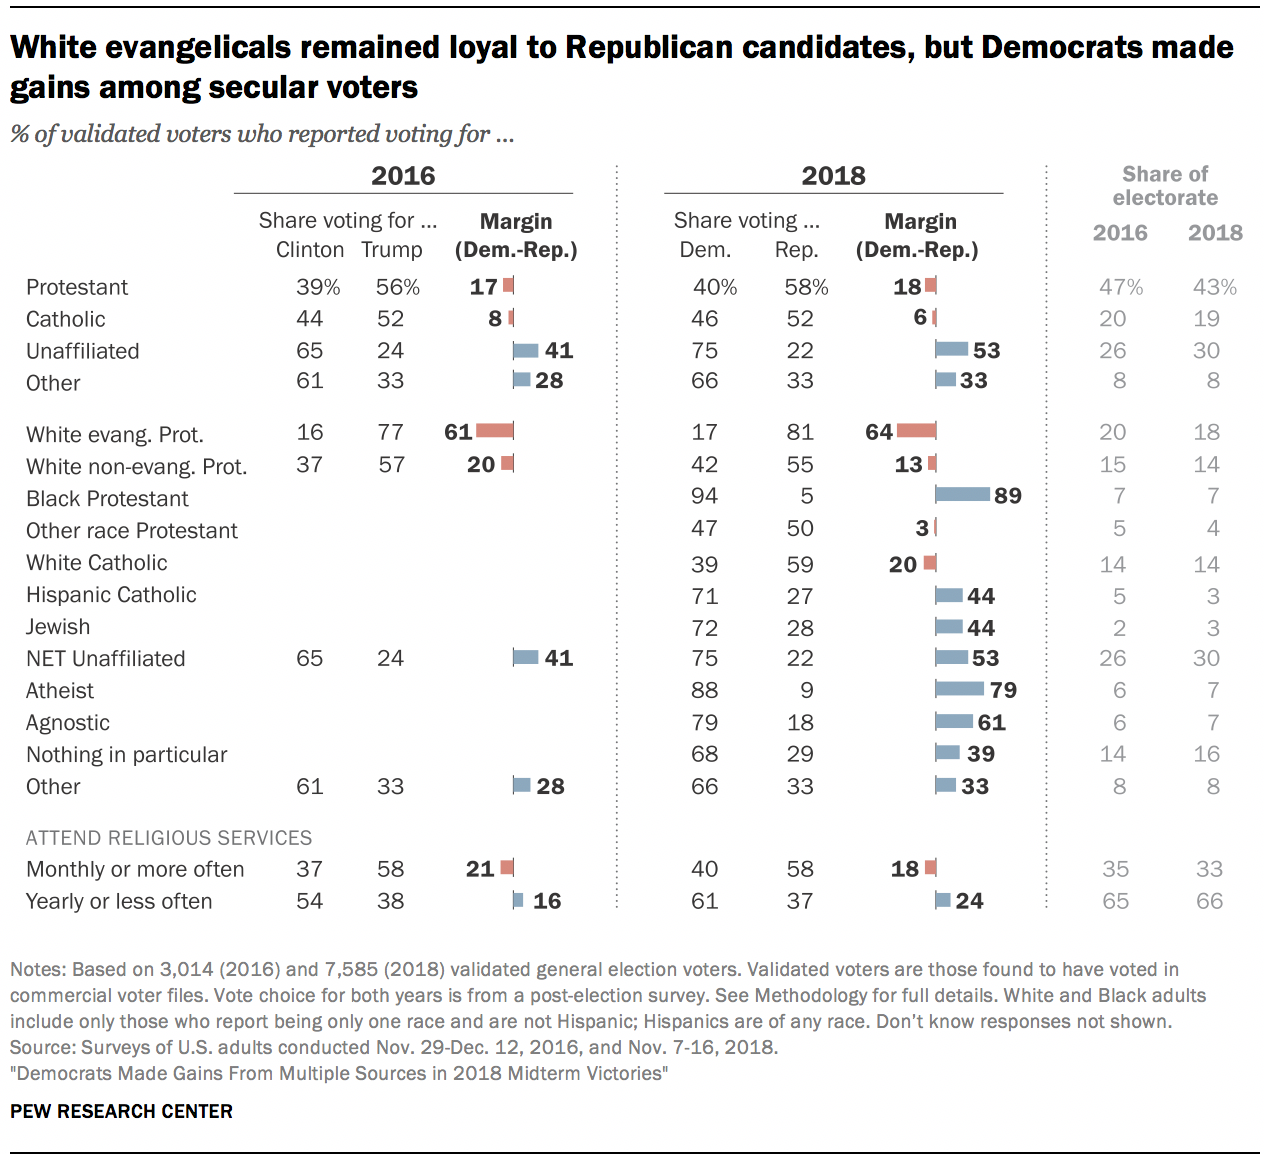 White evangelicals remained loyal to Republican candidates, but Democrats made gains among secular voters